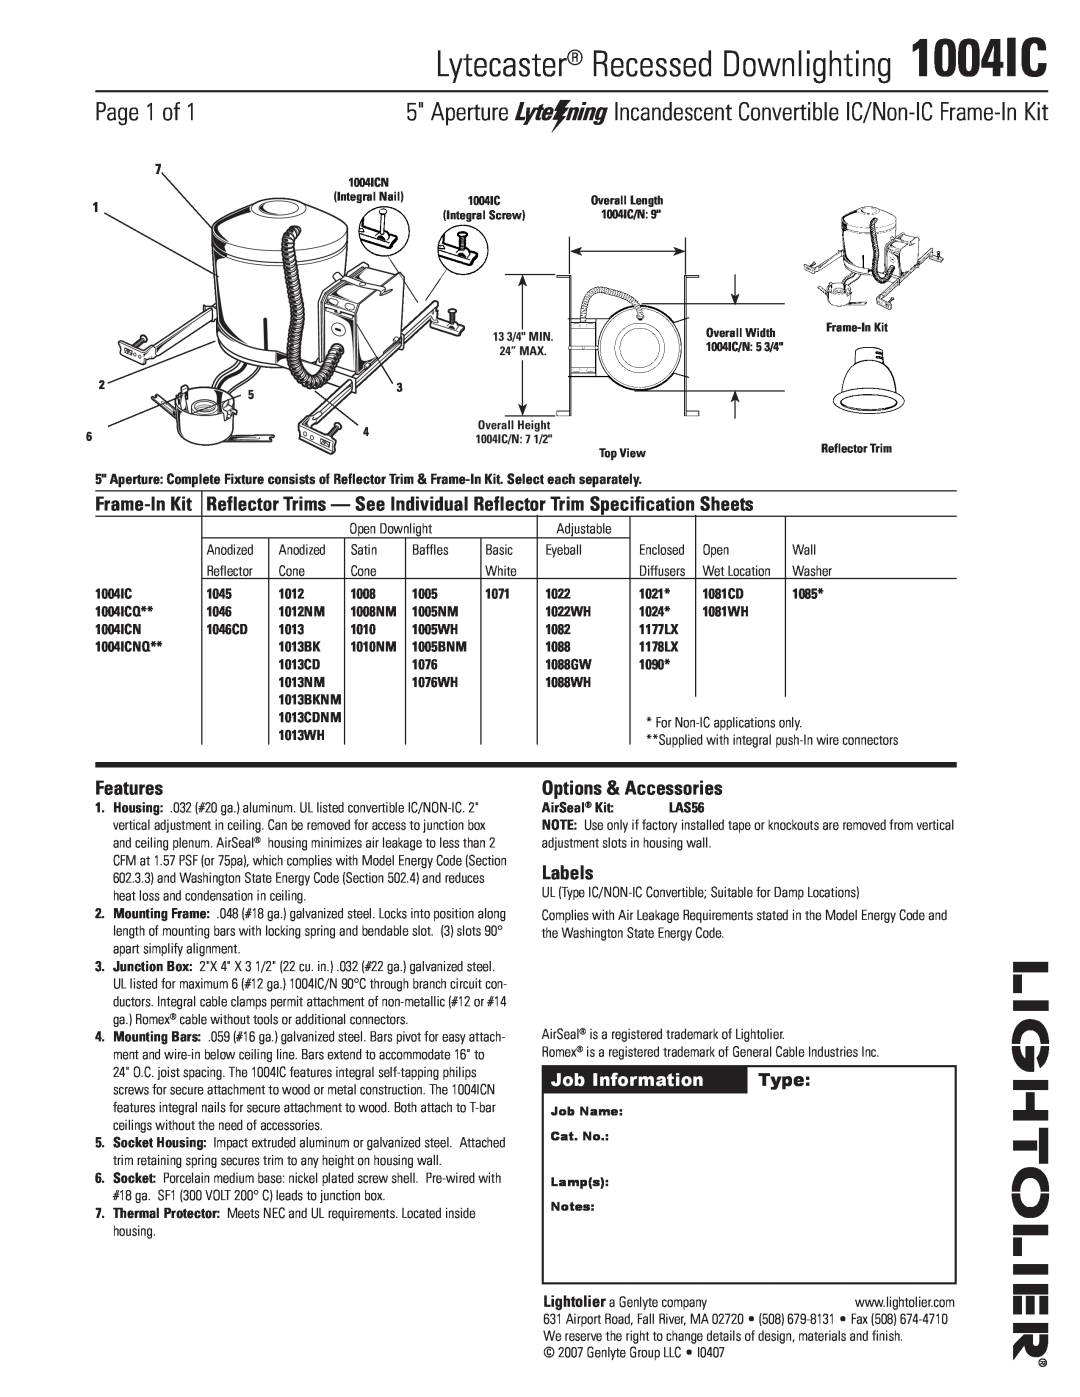 Lightolier specifications Lytecaster Recessed Downlighting 1004IC, Page 1 of, Features, Options & Accessories, Labels 